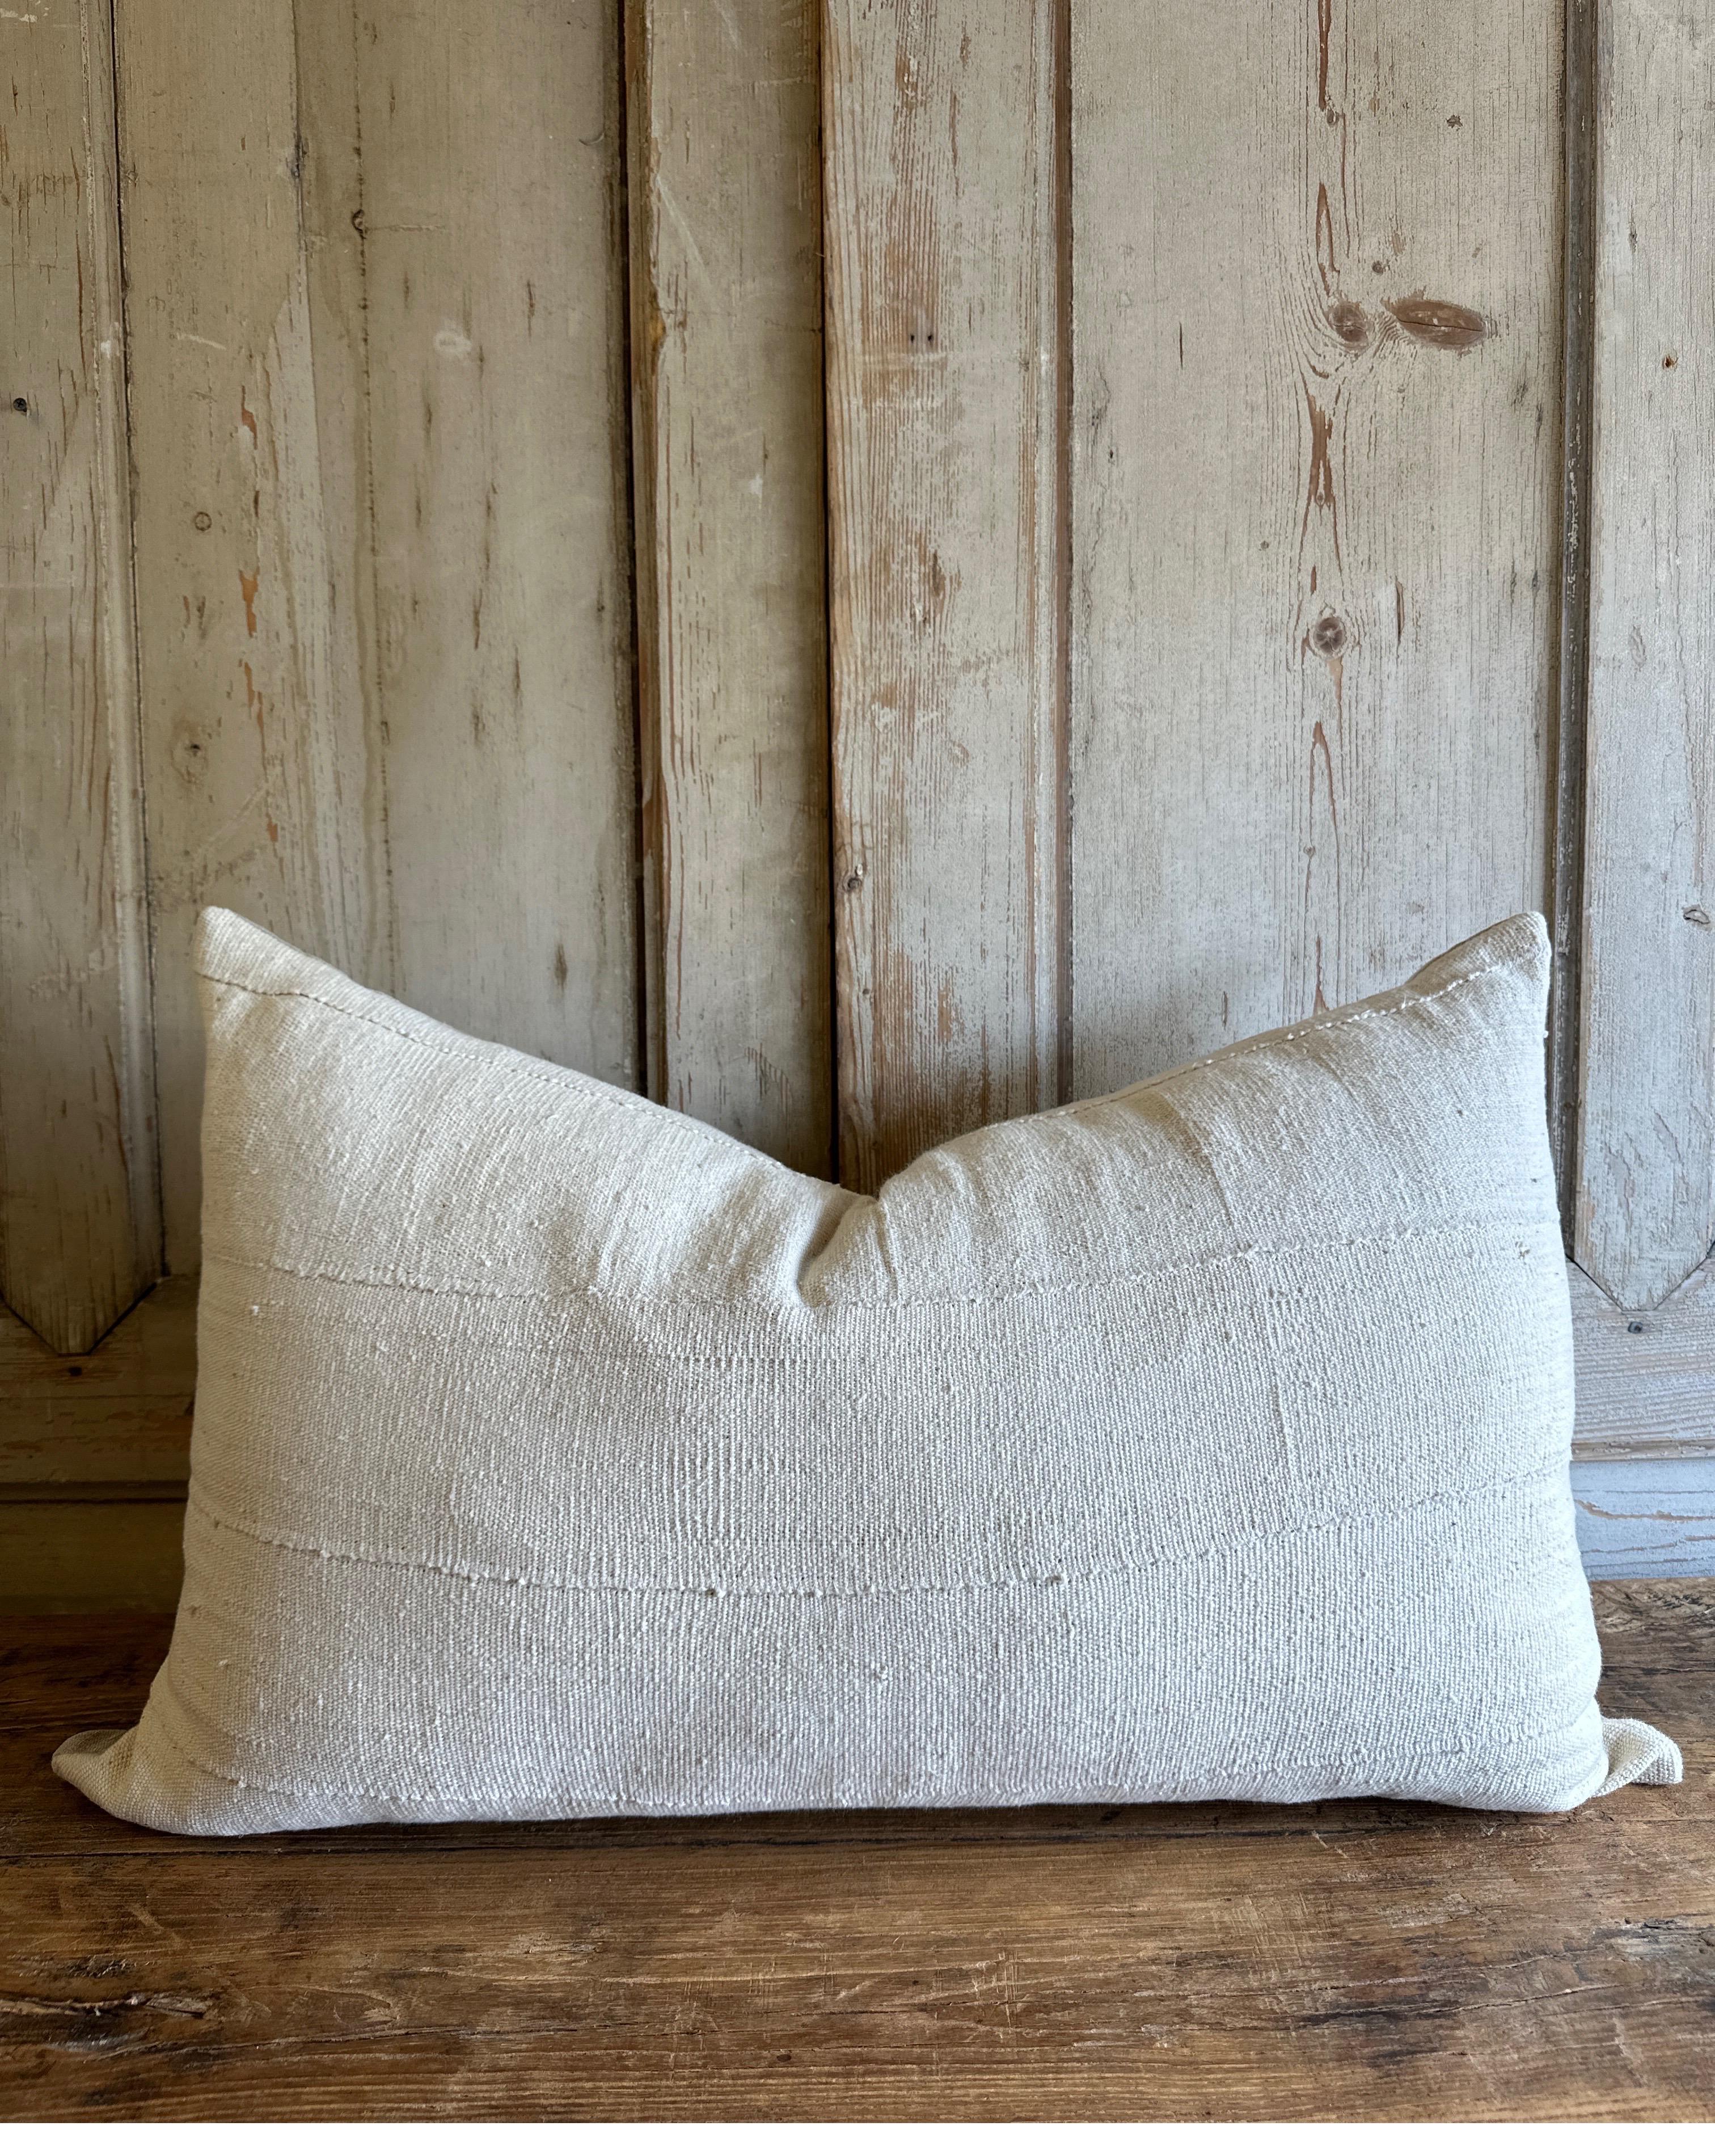 Vintage French Linen Lumbar Pillow
the face is made from an antique french linen with original seams, and stitching.
The back is a 100% flax linen, and down insert.
Measures 19x32, this makes a great accent pillow for the front of a bed.
Zipper